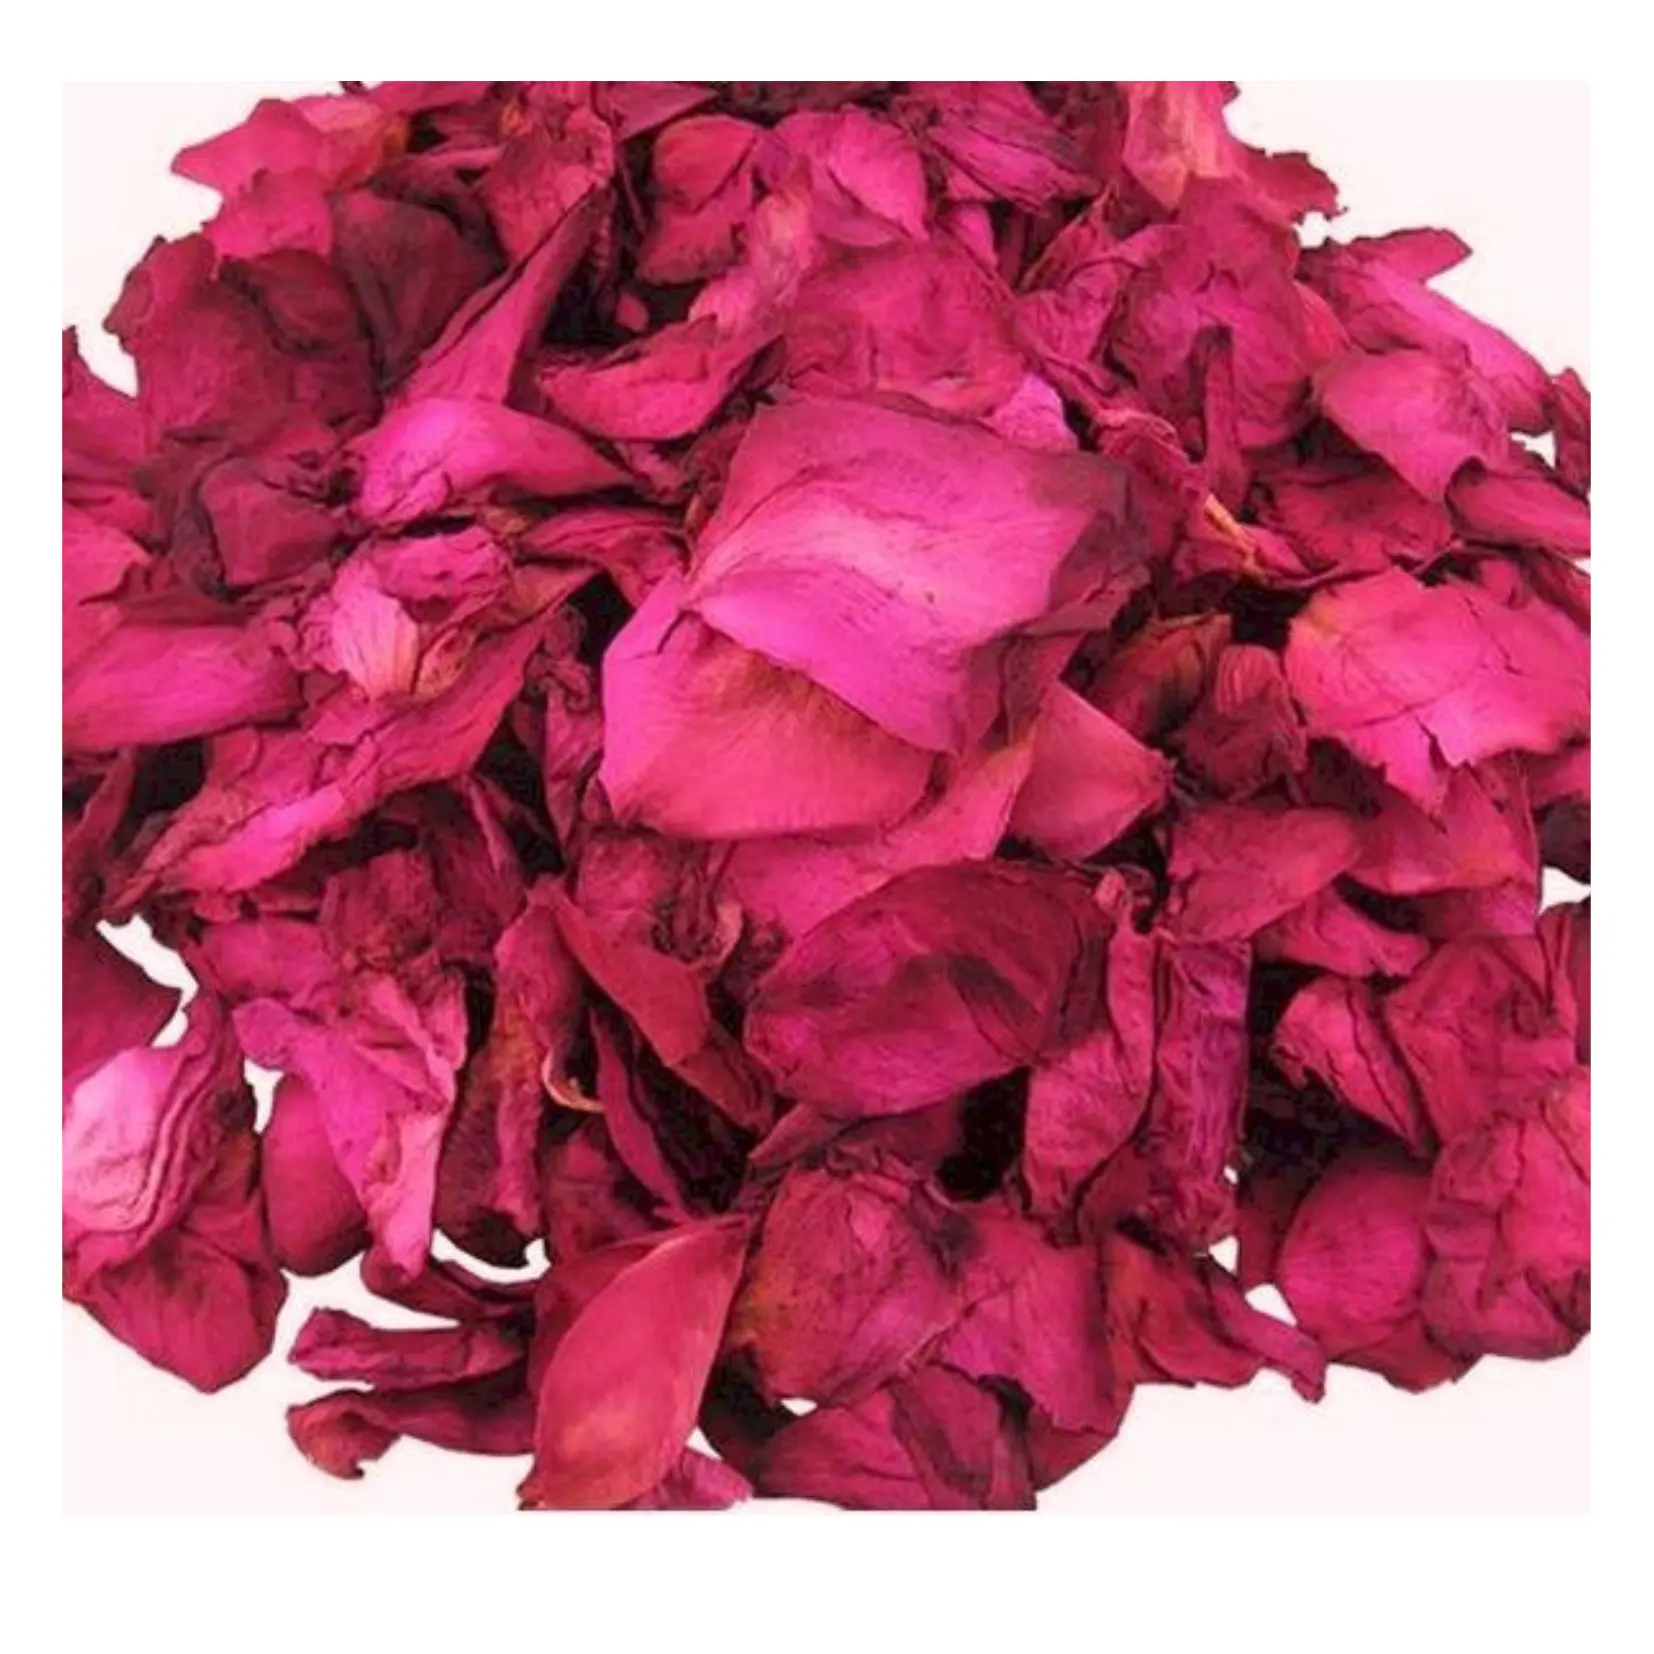 1 kg loose rose petals for decoration/foot bath Wholesale price health dried rose flower for sachet Christmas or decoration Wedd